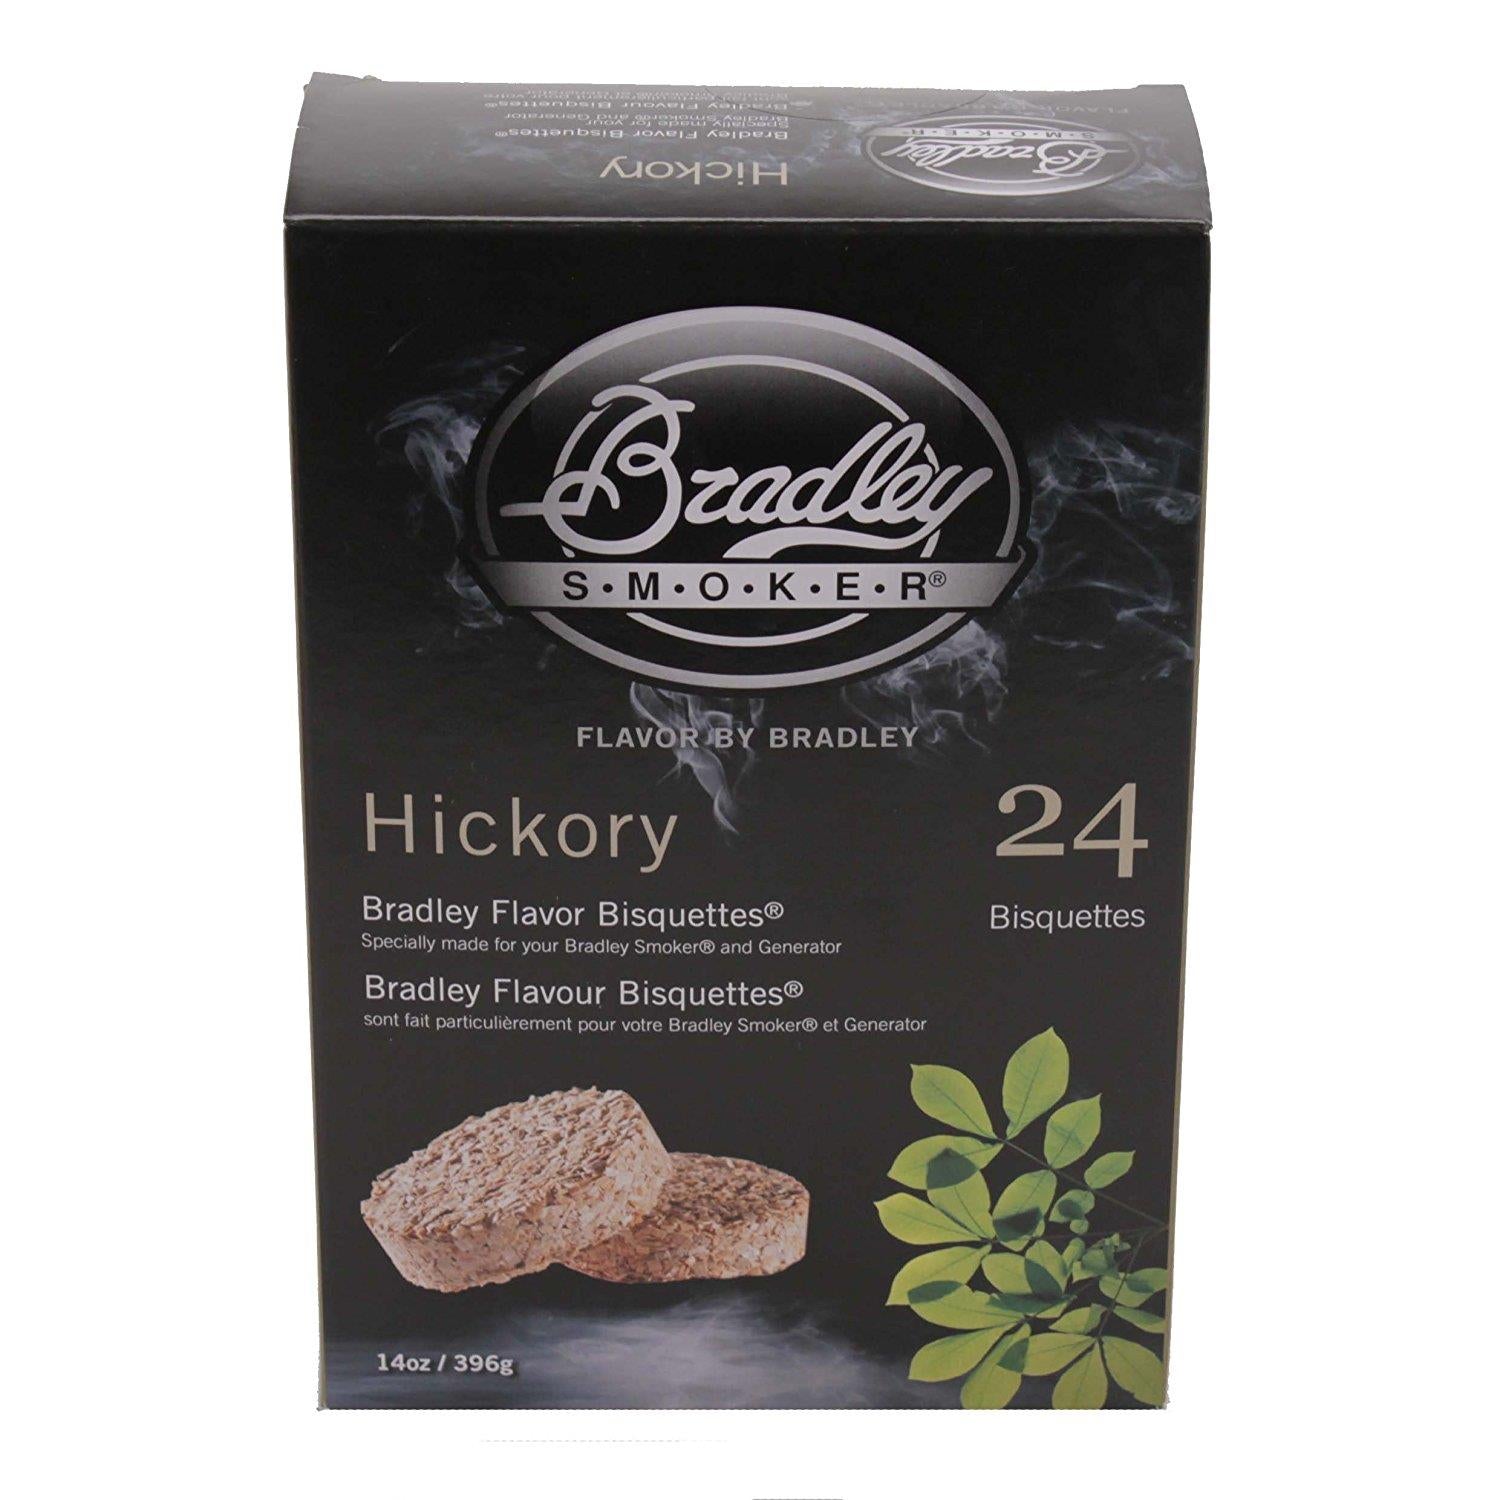 Hickory Flavor Bisquettes